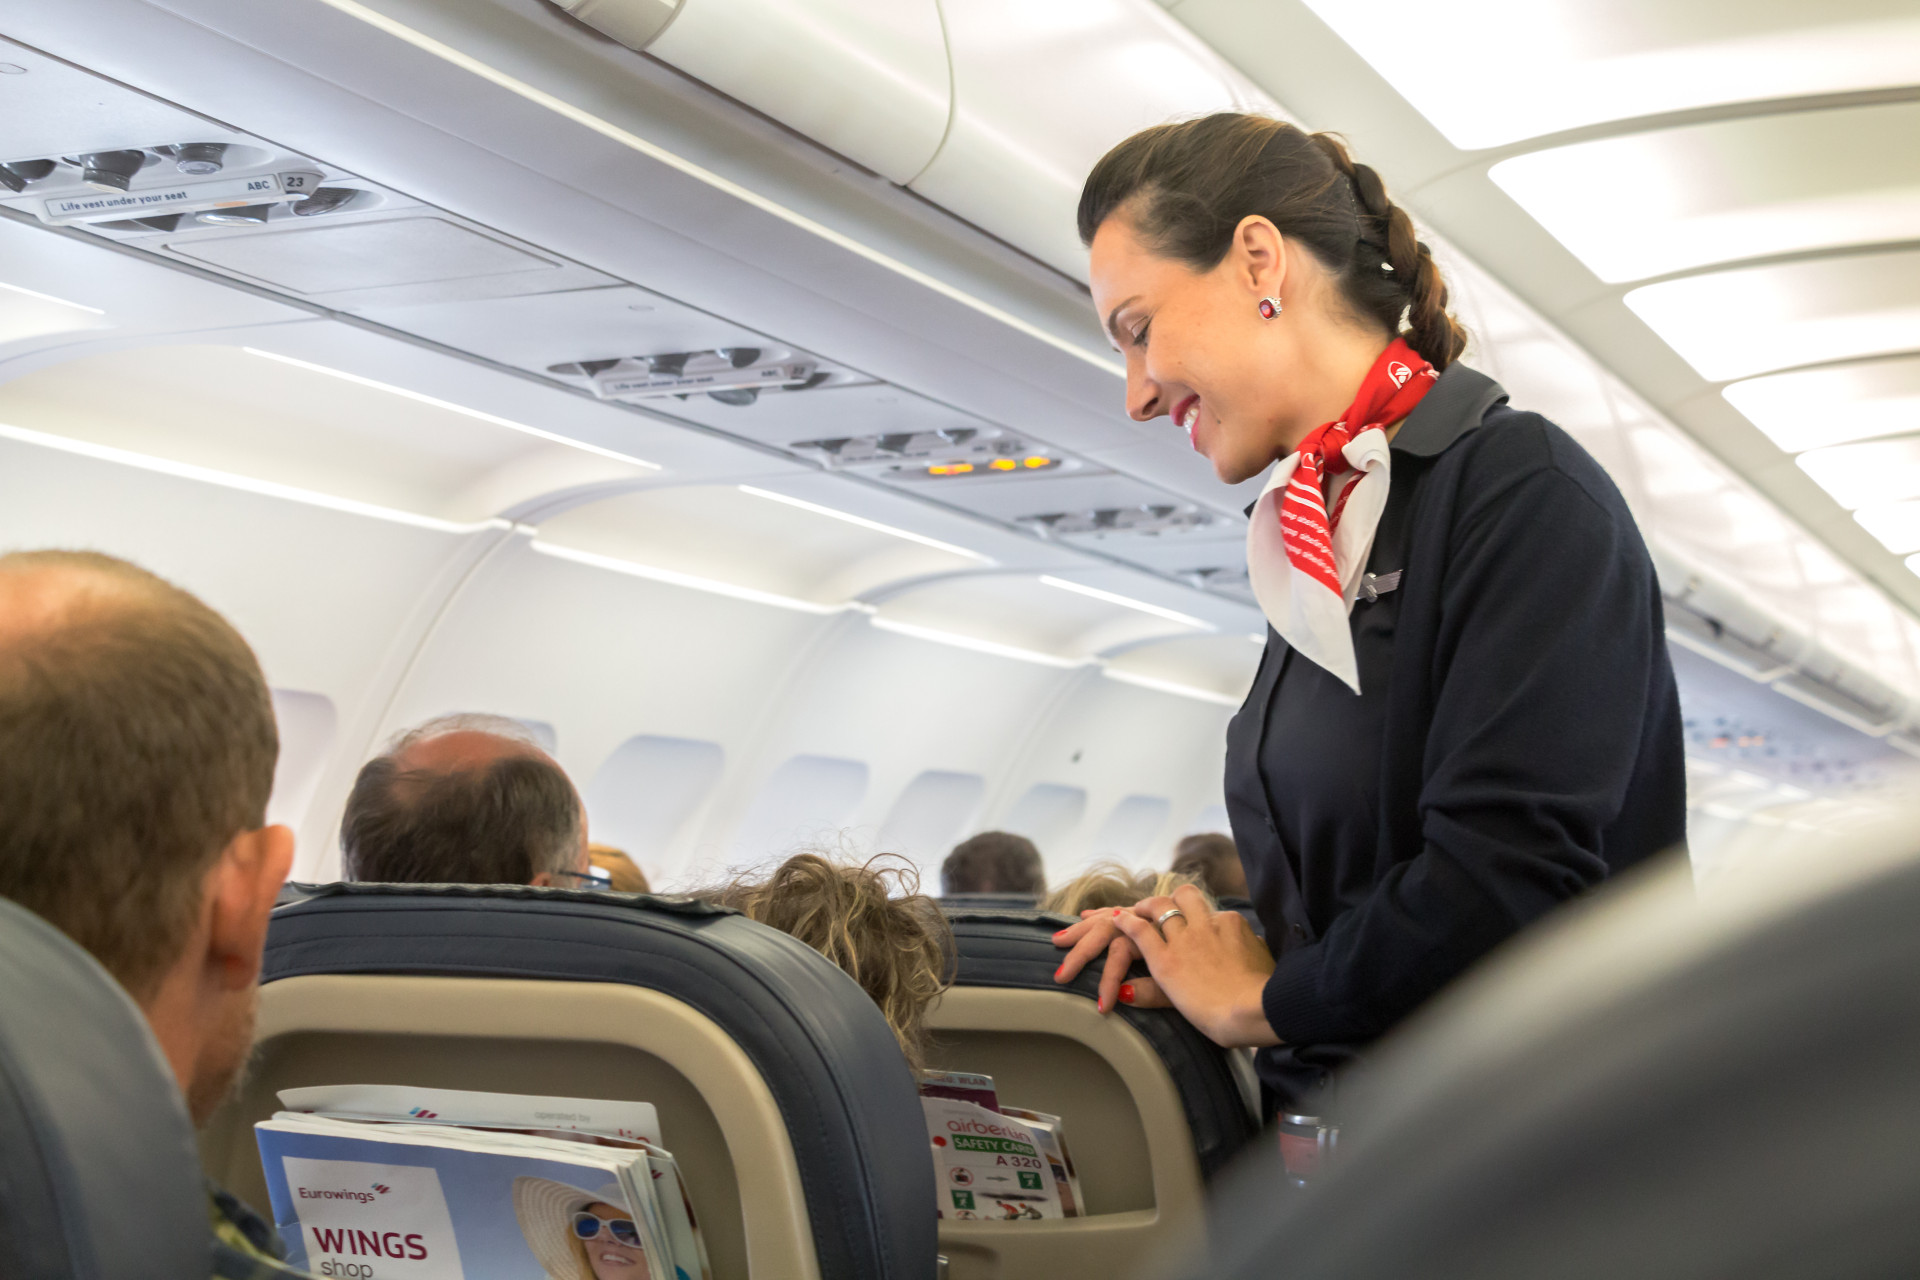 Wages vary immensely depending on the airlines, as low-cost ones pay much less than mid-range or luxury ones, and also how many hours they fly. Flight attendants can earn anywhere between US$25,000 and US$80,000 a year!<p>You may also like:<a href="https://www.starsinsider.com/n/452467?utm_source=msn.com&utm_medium=display&utm_campaign=referral_description&utm_content=240533v6en-us"> Hollywood stars and their first R-rated movies</a></p>